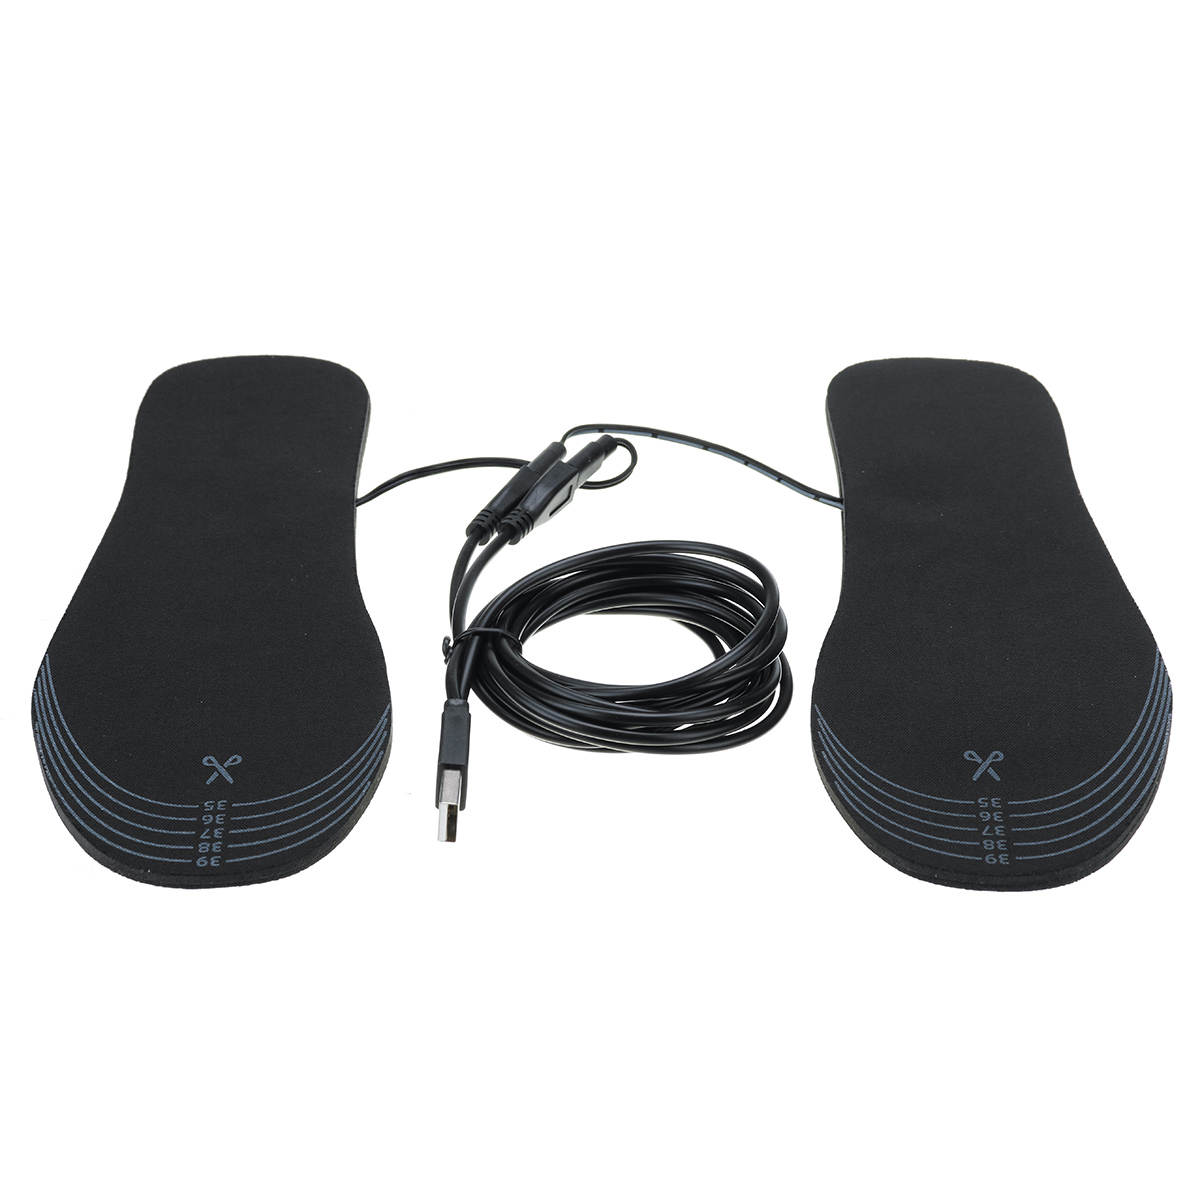 USB-Electric-Heated-Shoe-Insoles-Electric-Film-Feet-Heater-Outdoor-Warm-Socks-Pads-Winter-Sports-Acc-1809982-7